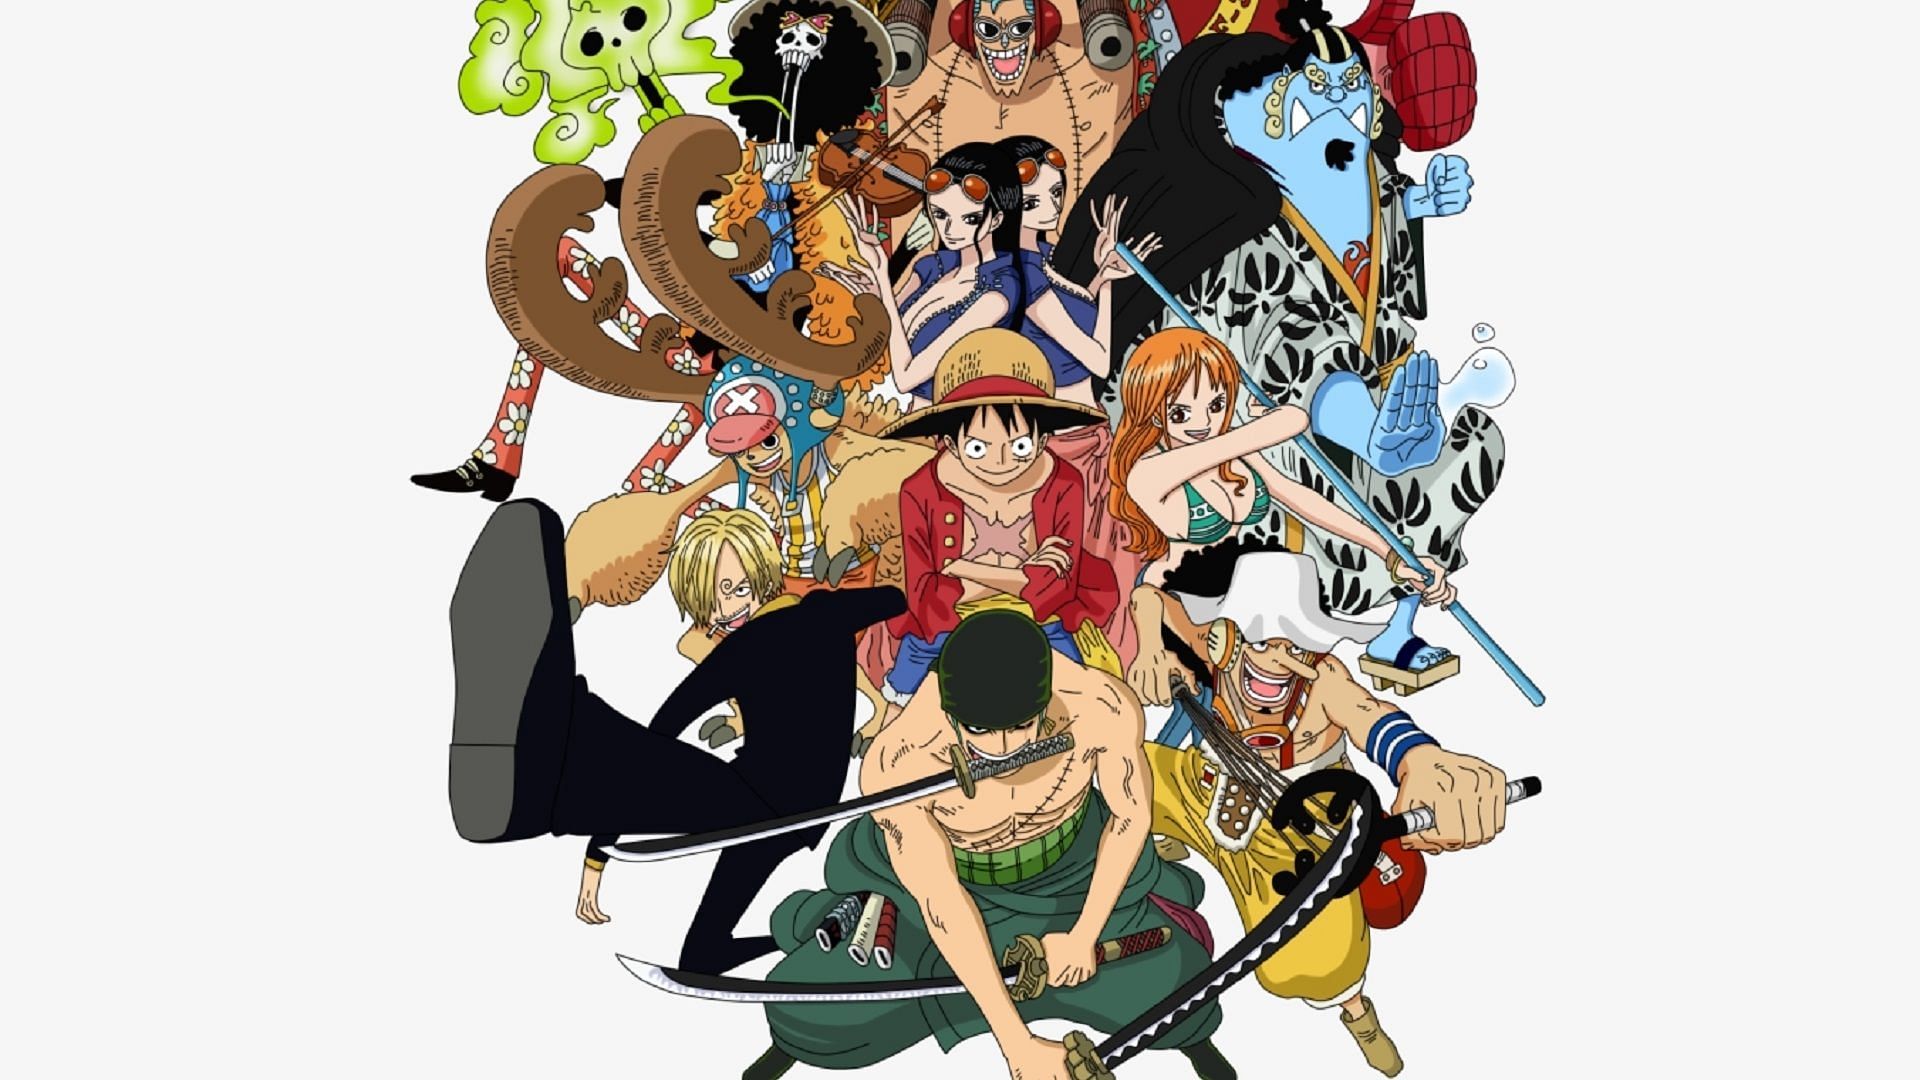 The Straw Hat Pirates as seen in One Piece (Image via Toei Animation, One Piece)